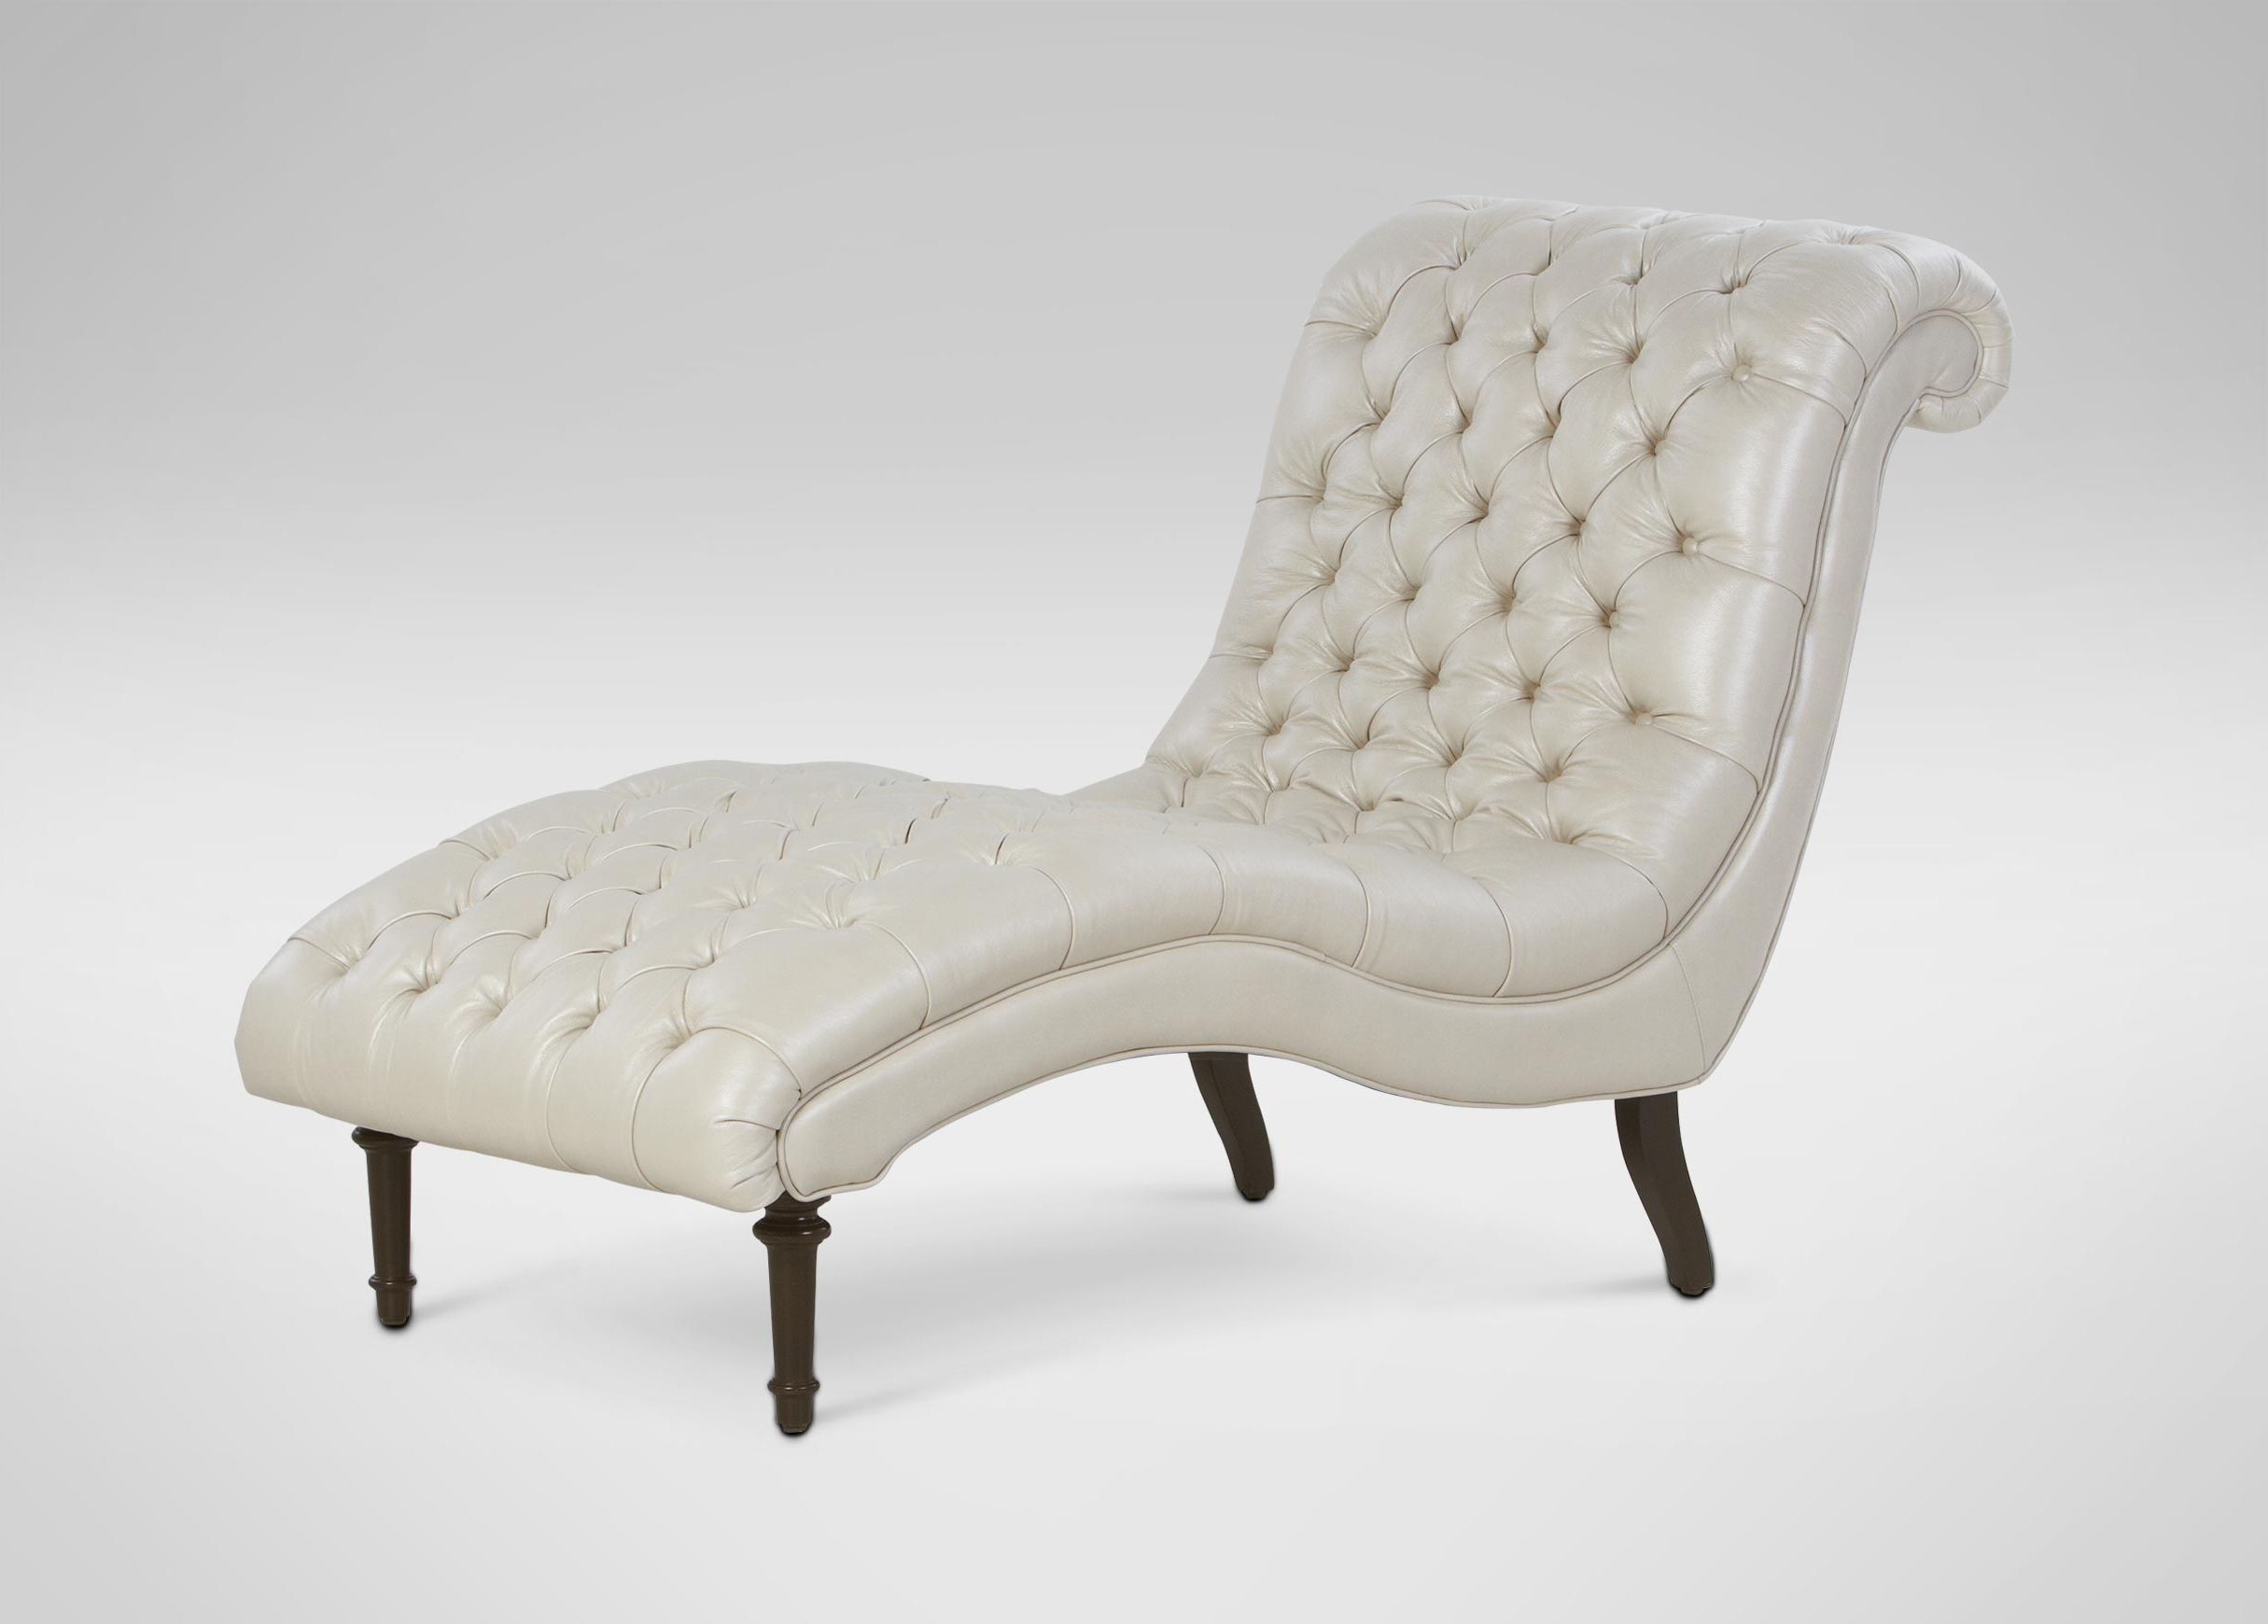 Chairs & Chaises Regarding Most Recently Released Ethan Allen Chaises (View 1 of 15)